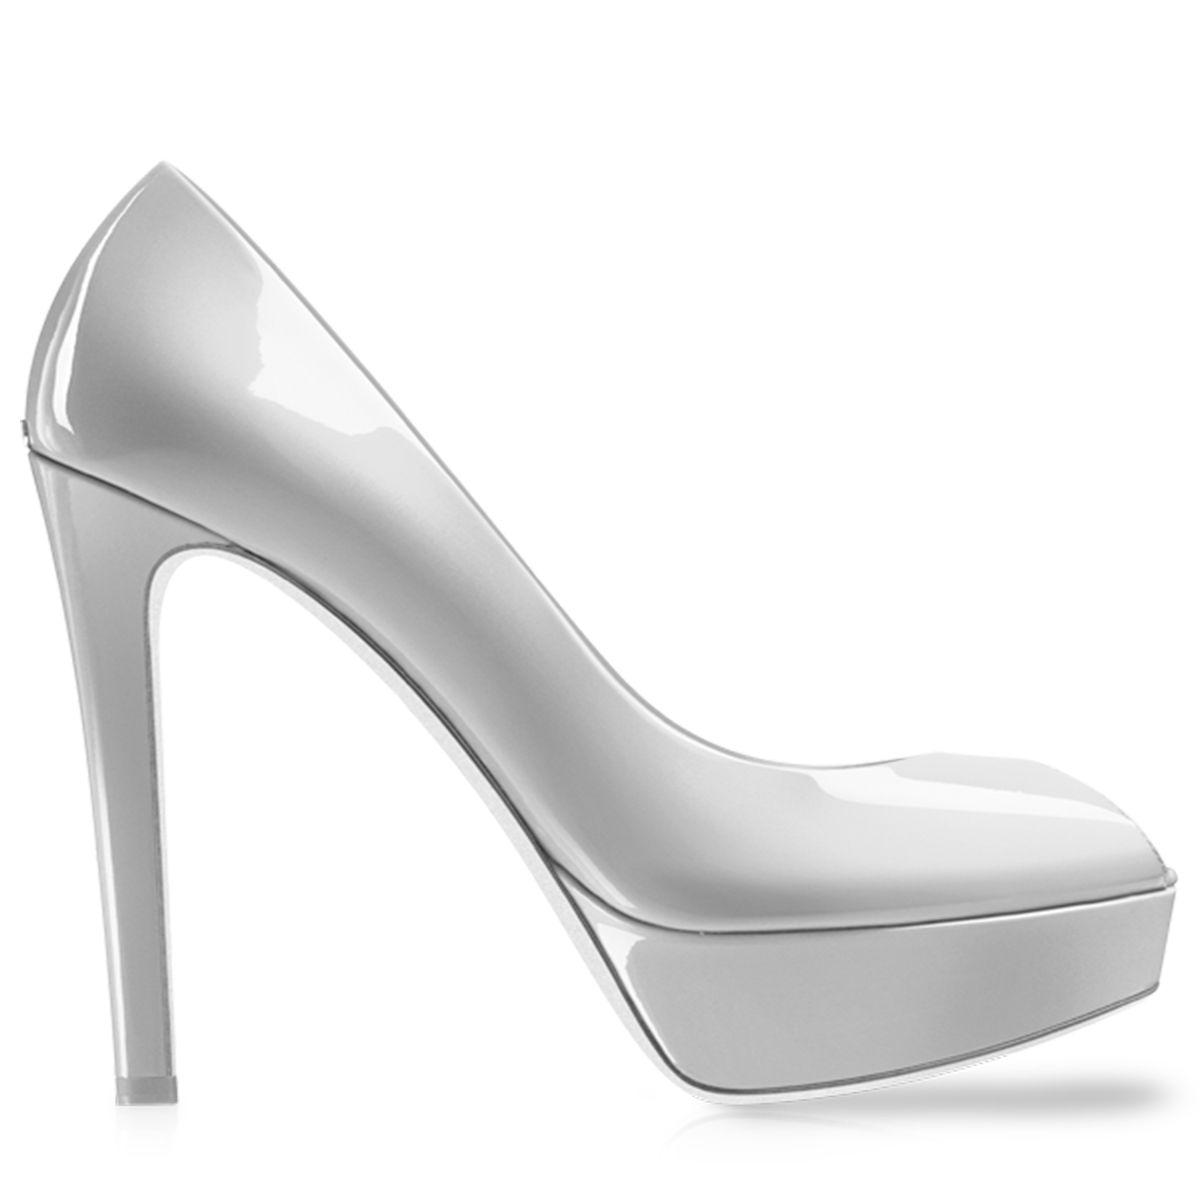 Women shoes PNG image    图片编号:7442